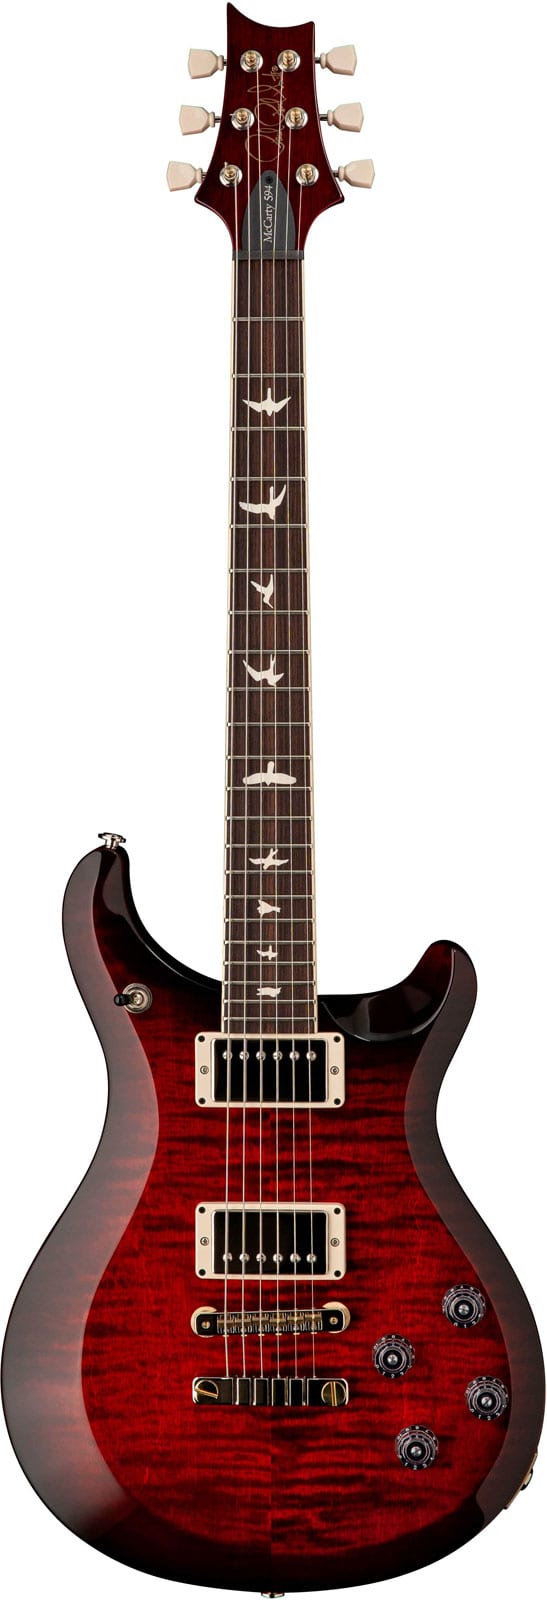 PRS - PAUL REED SMITH S2 MCCARTY 594 FIRE RED BURST - GELEGENHEIDSPRODUCT